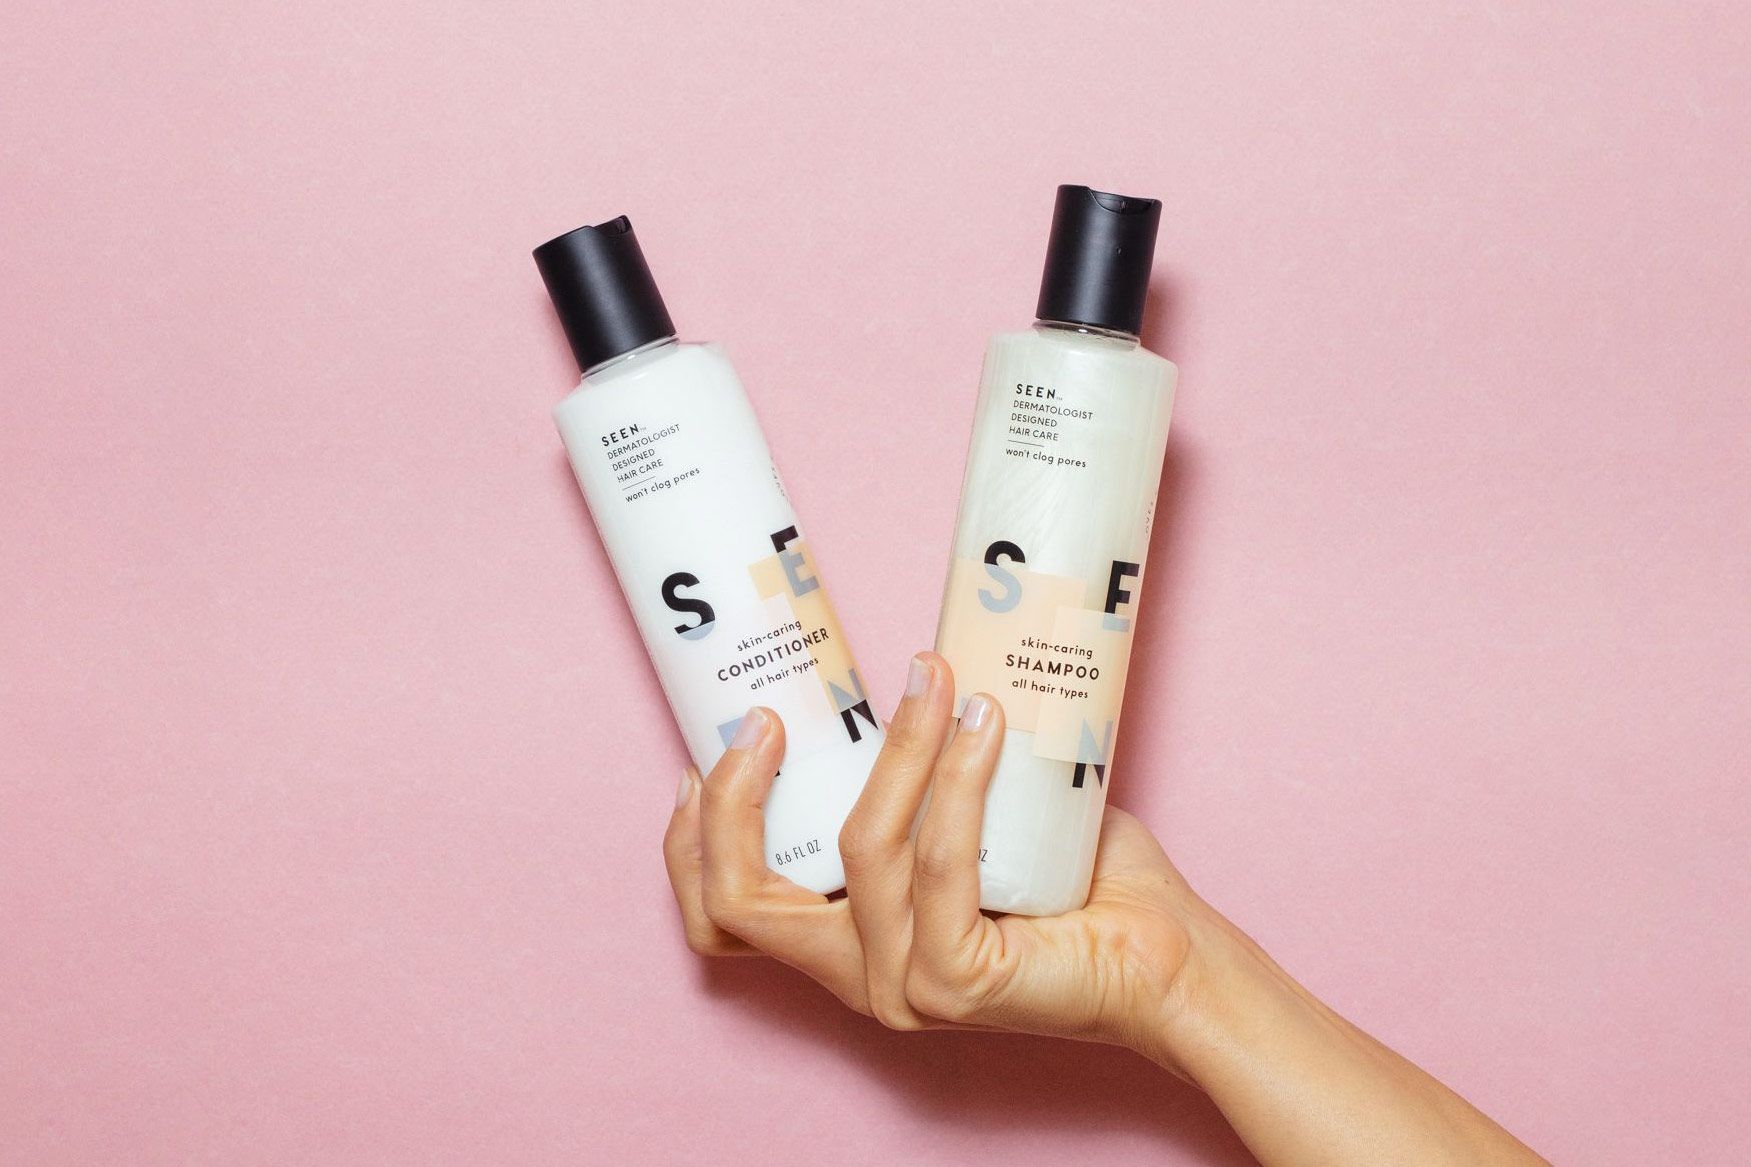 SEEN Shampoo and Conditioner Review 2021 | The Strategist